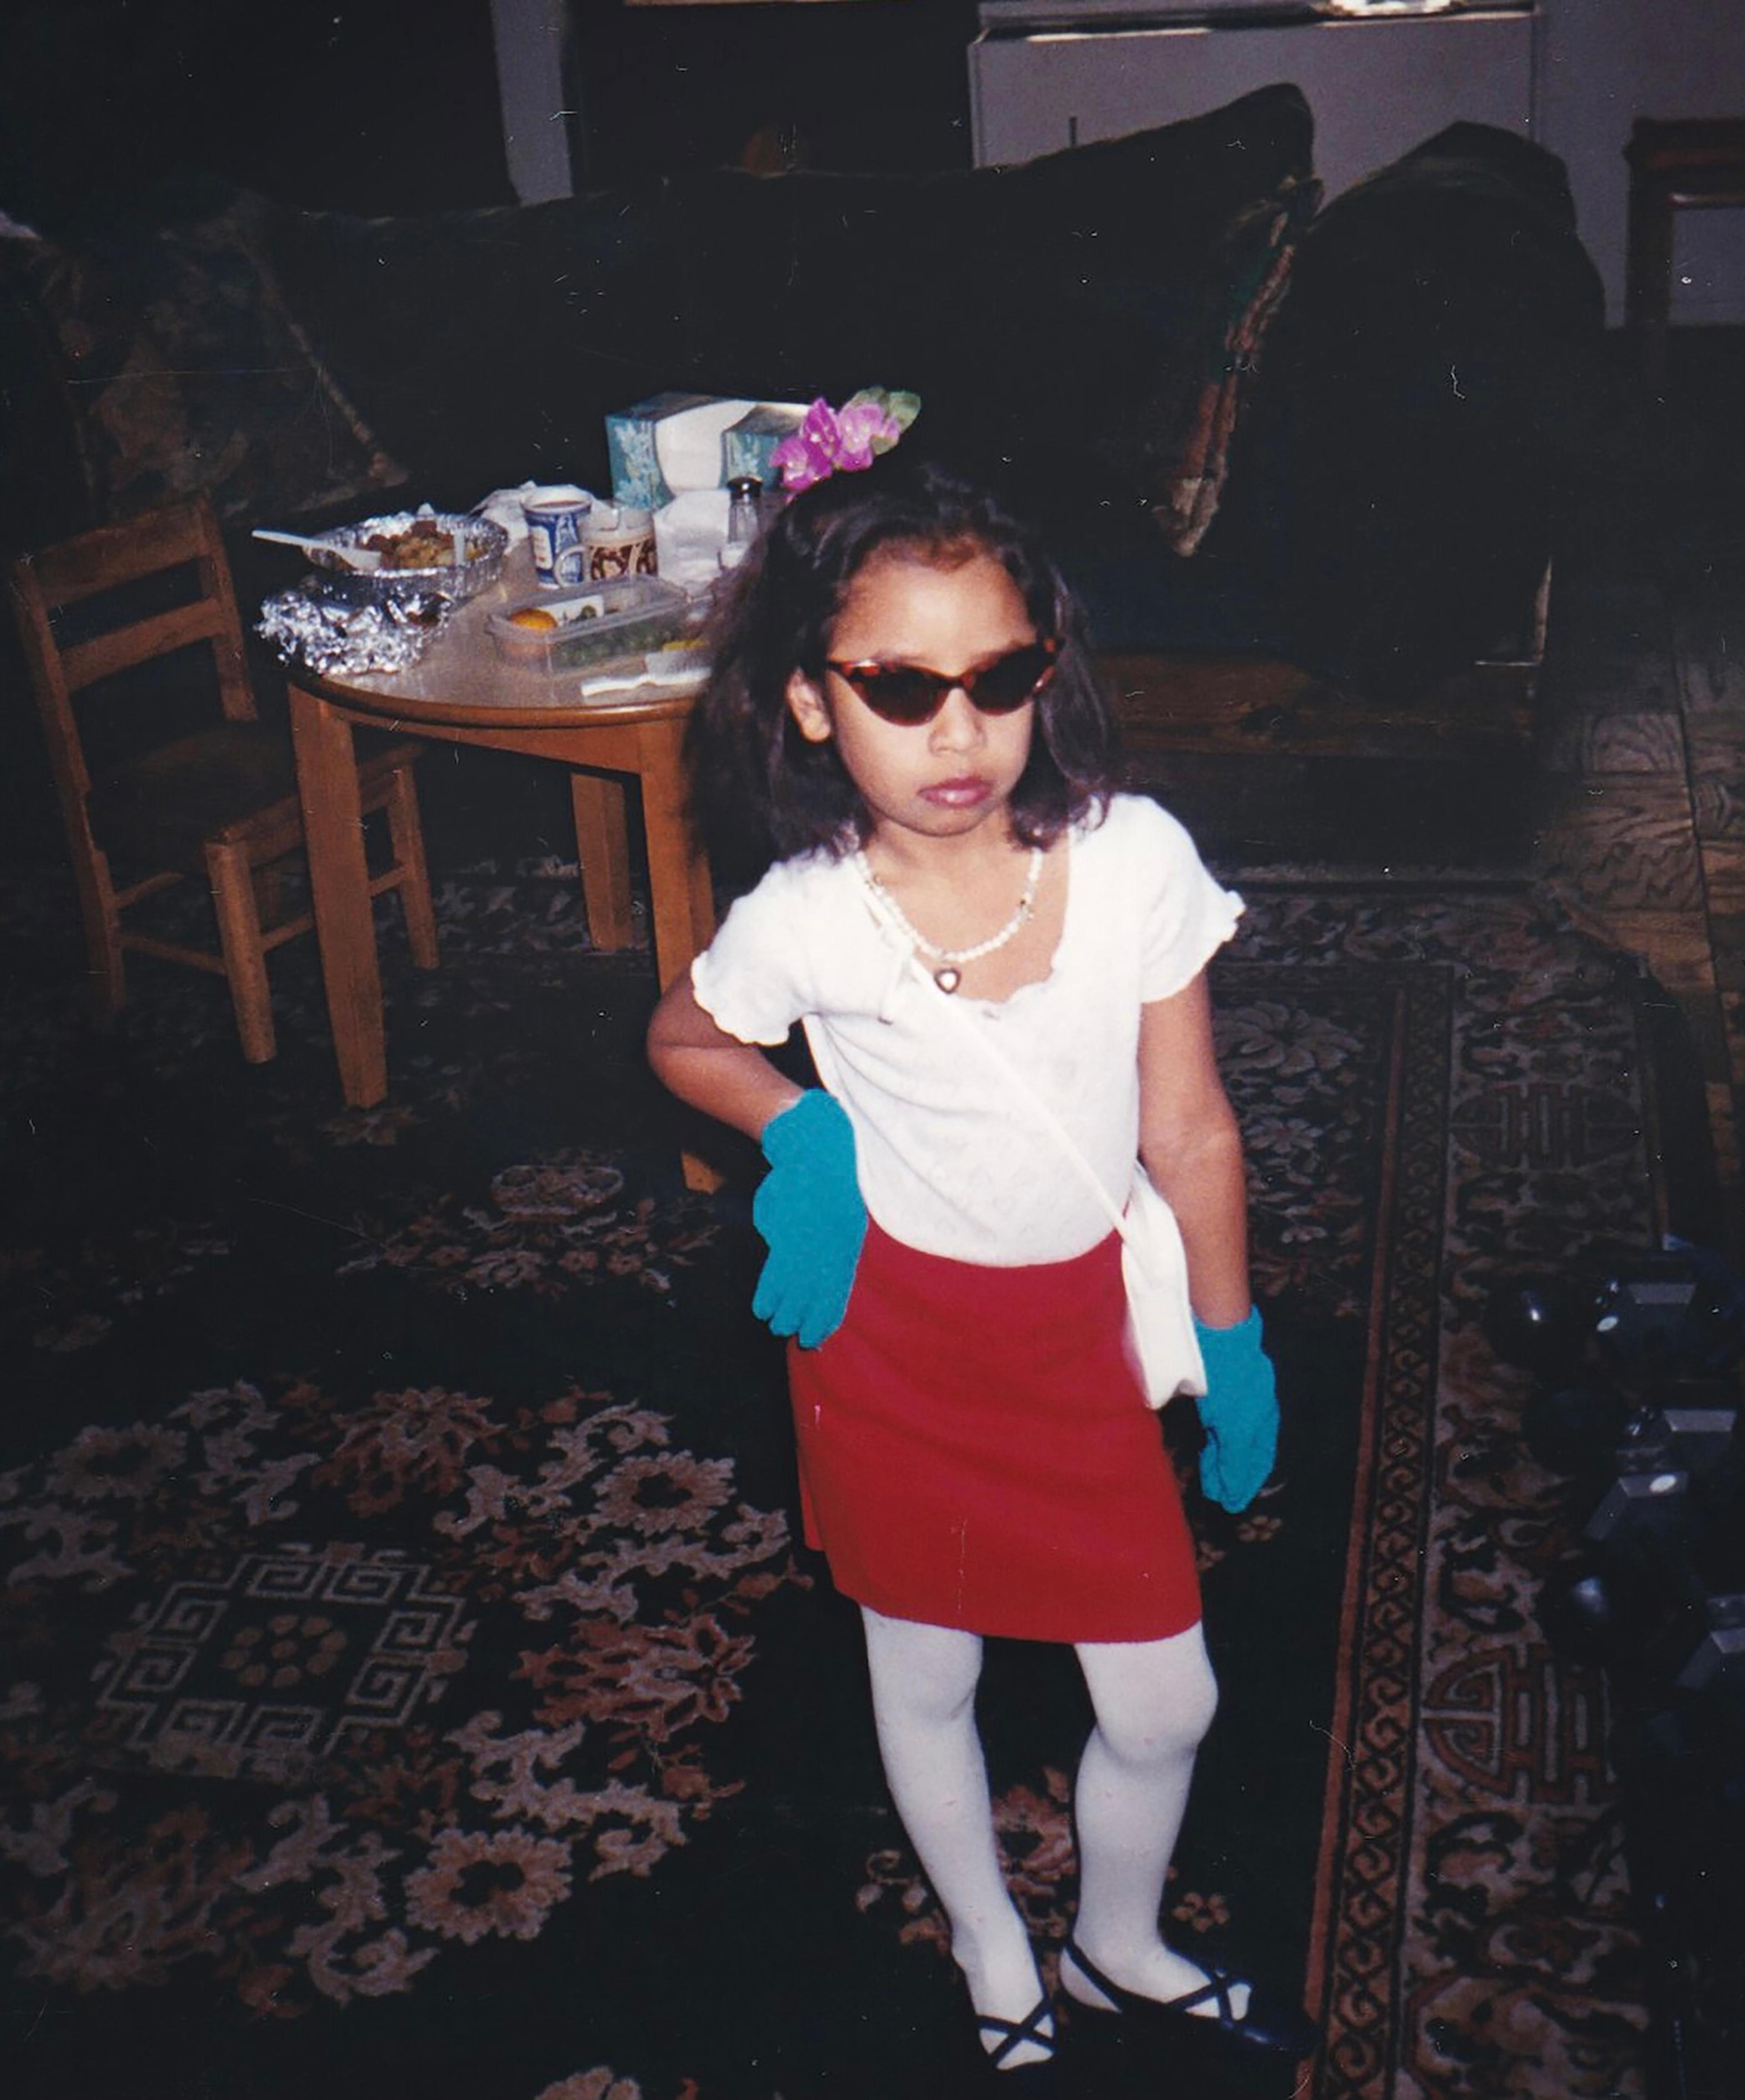 A photograph of a young child wearing sunglasses and posing with her hand on her hip